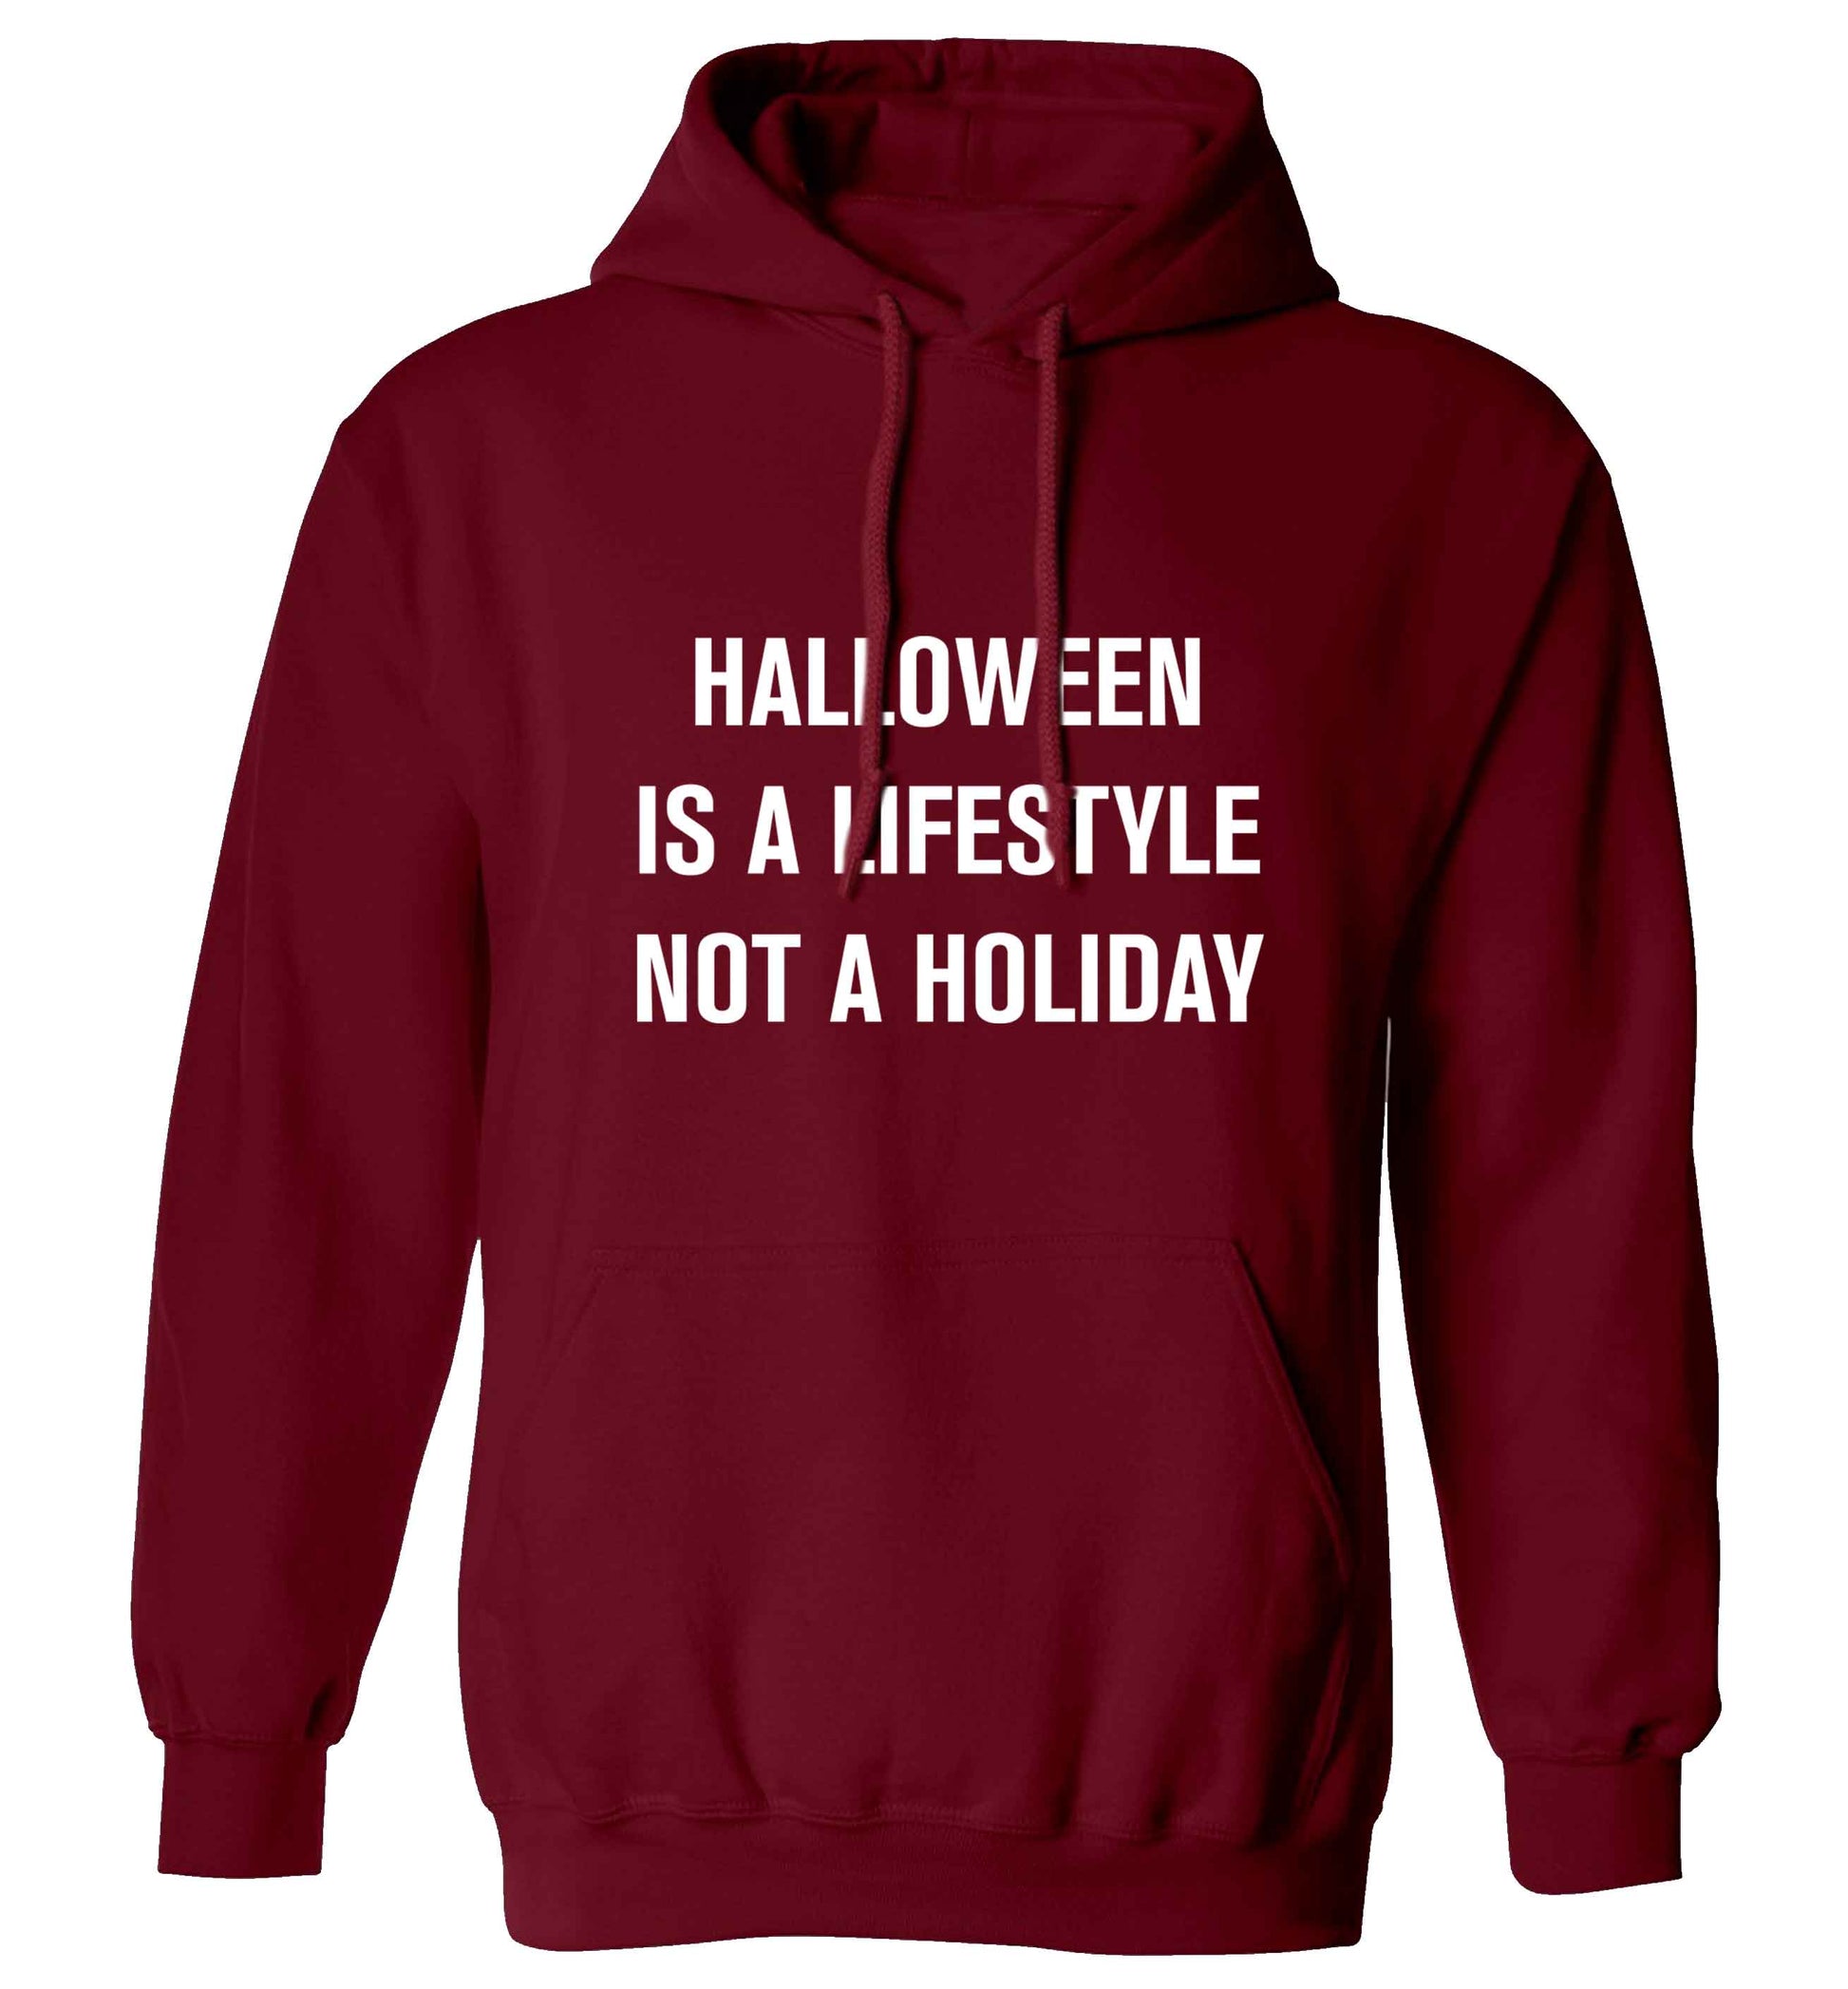 Halloween is a lifestyle not a holiday adults unisex maroon hoodie 2XL